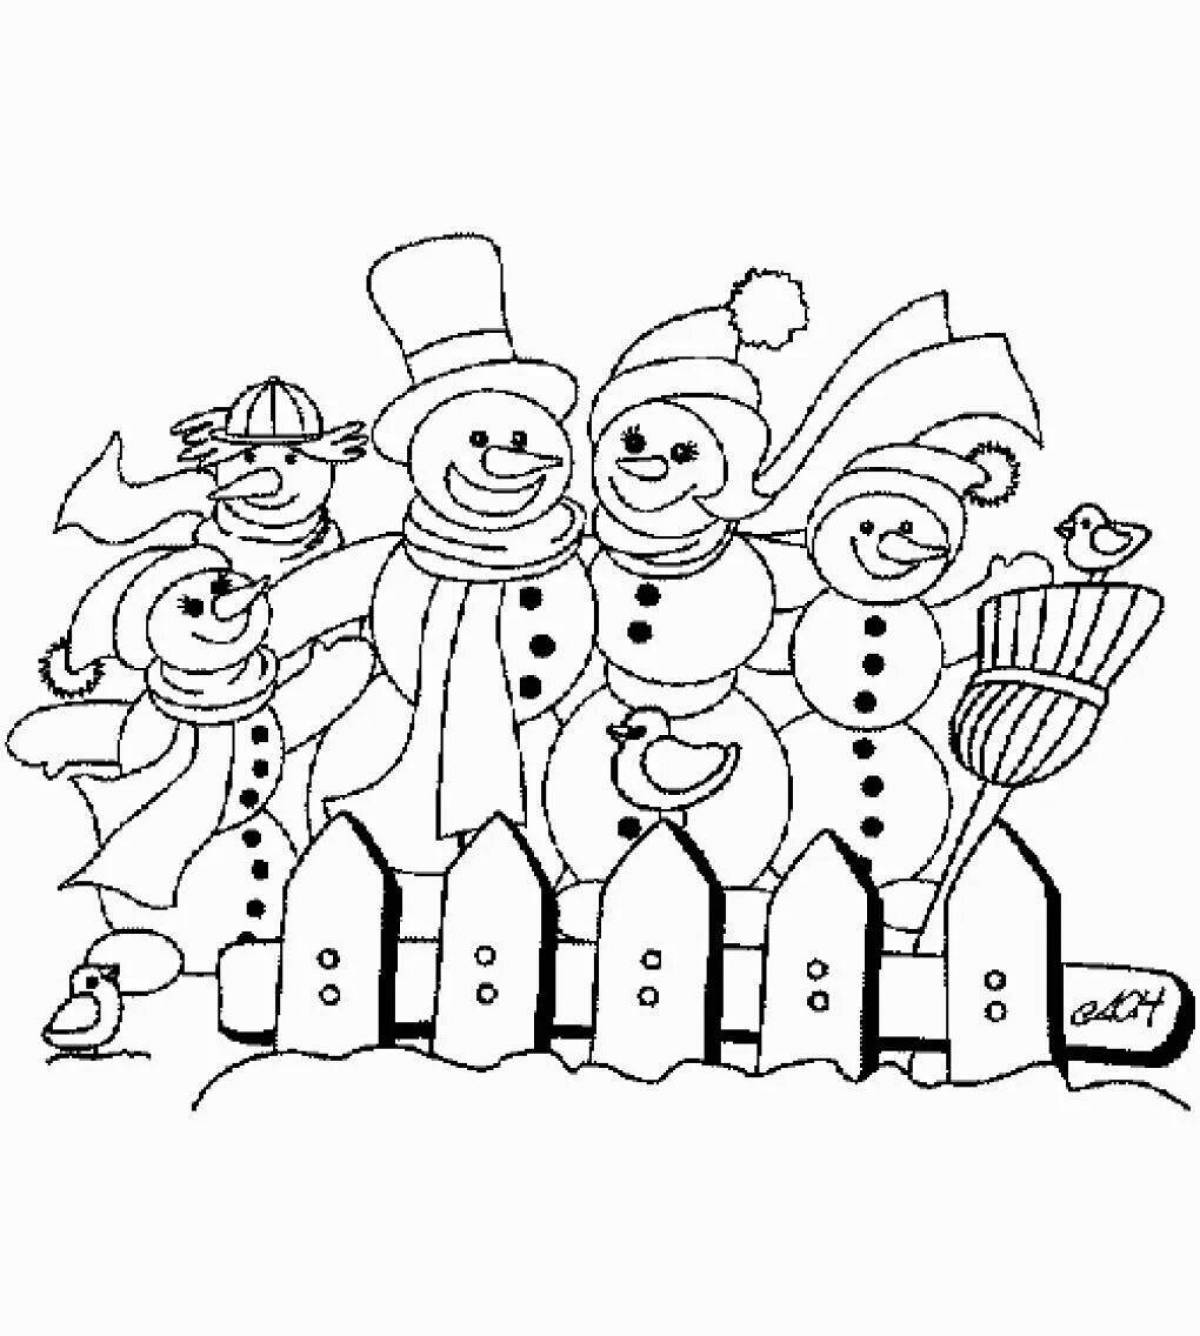 The holiday page of the snowman family